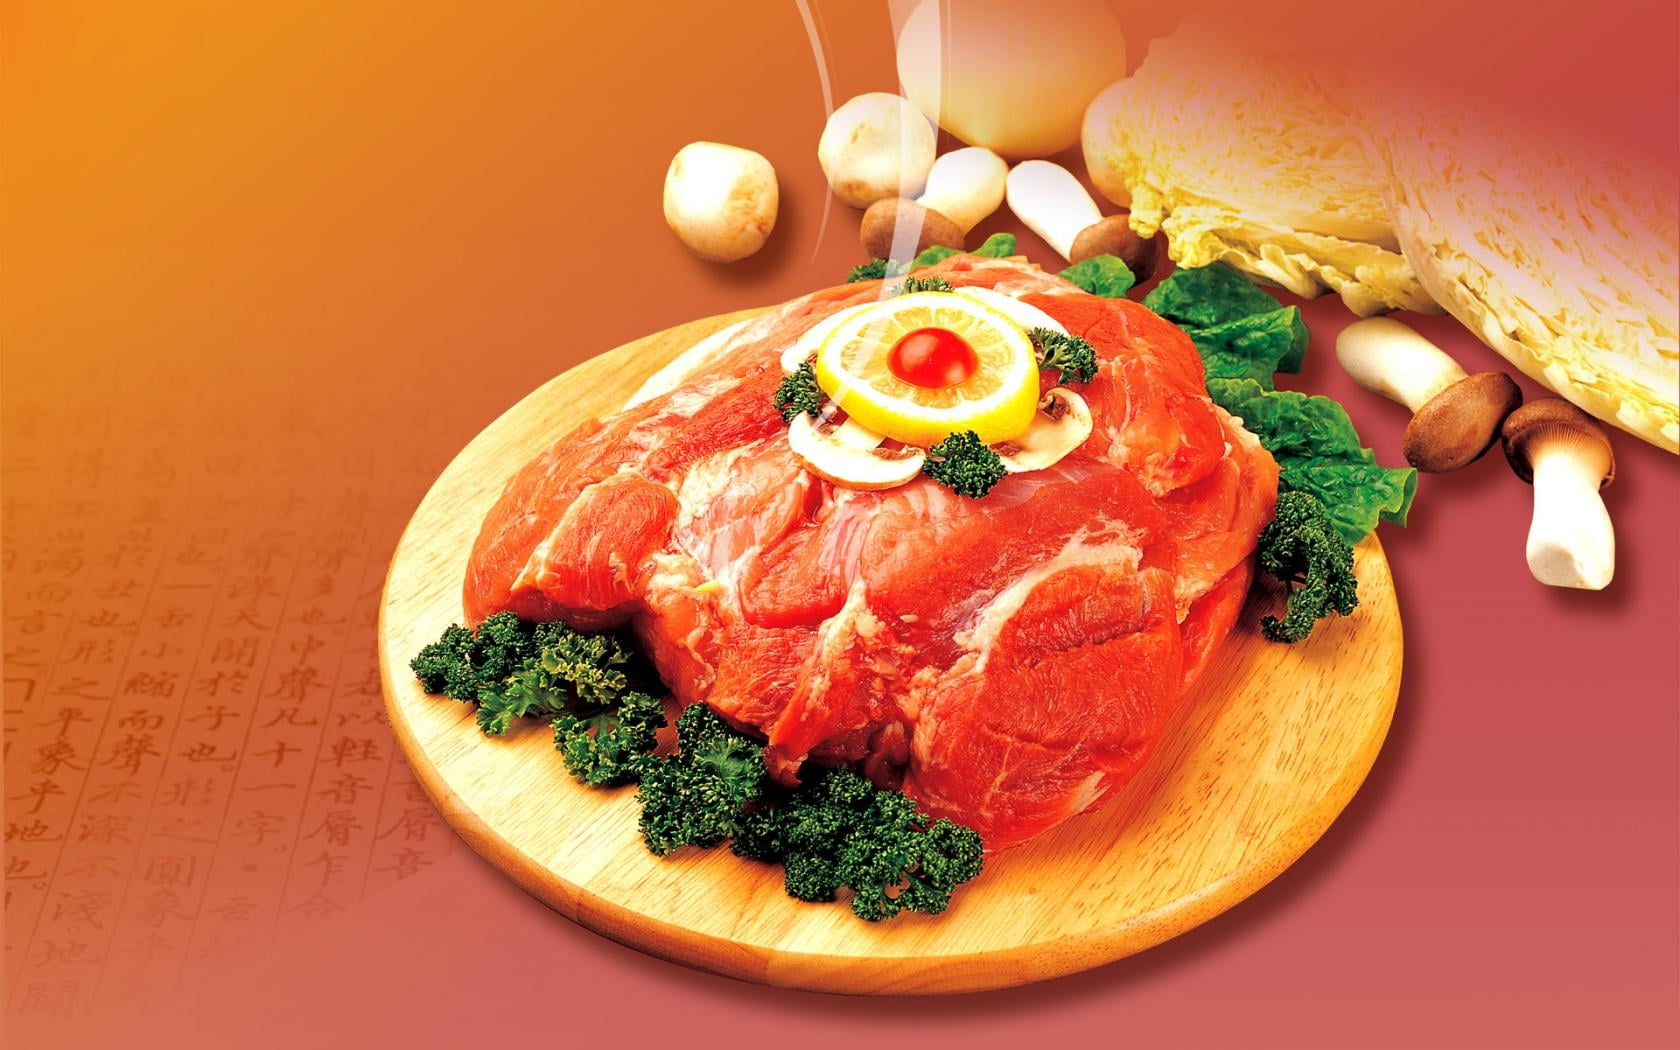 sliced raw meat with lemon and vegetables